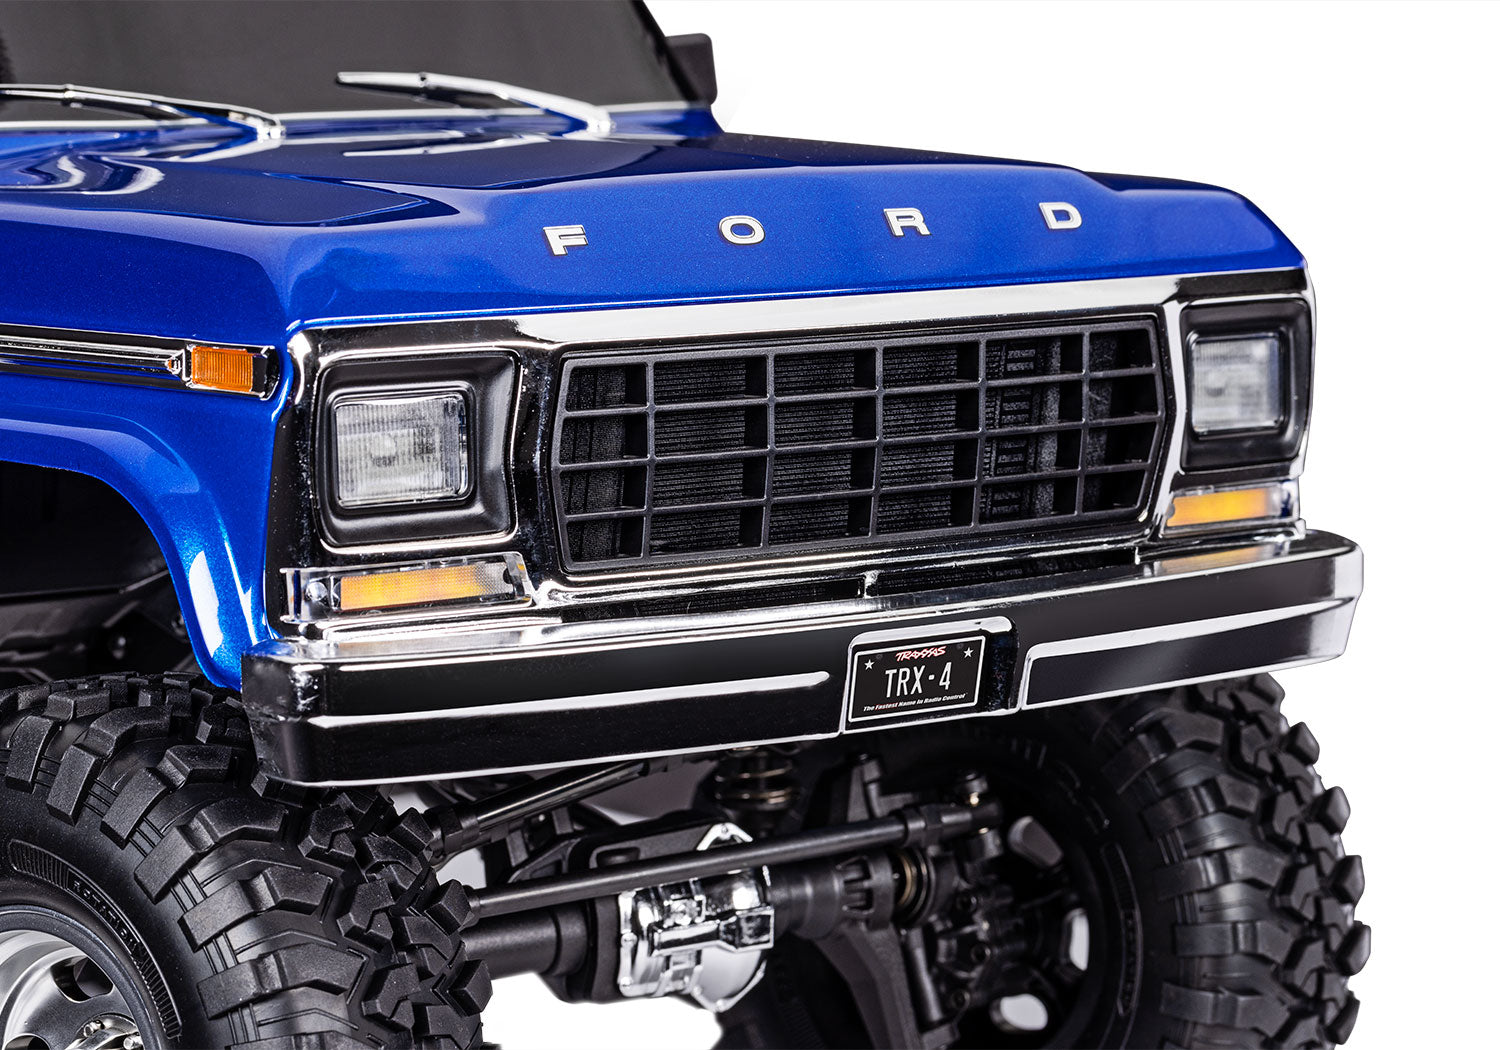 92046-4-BLUE TRX-4 Ford F-150 High Trail Edition – Superstition